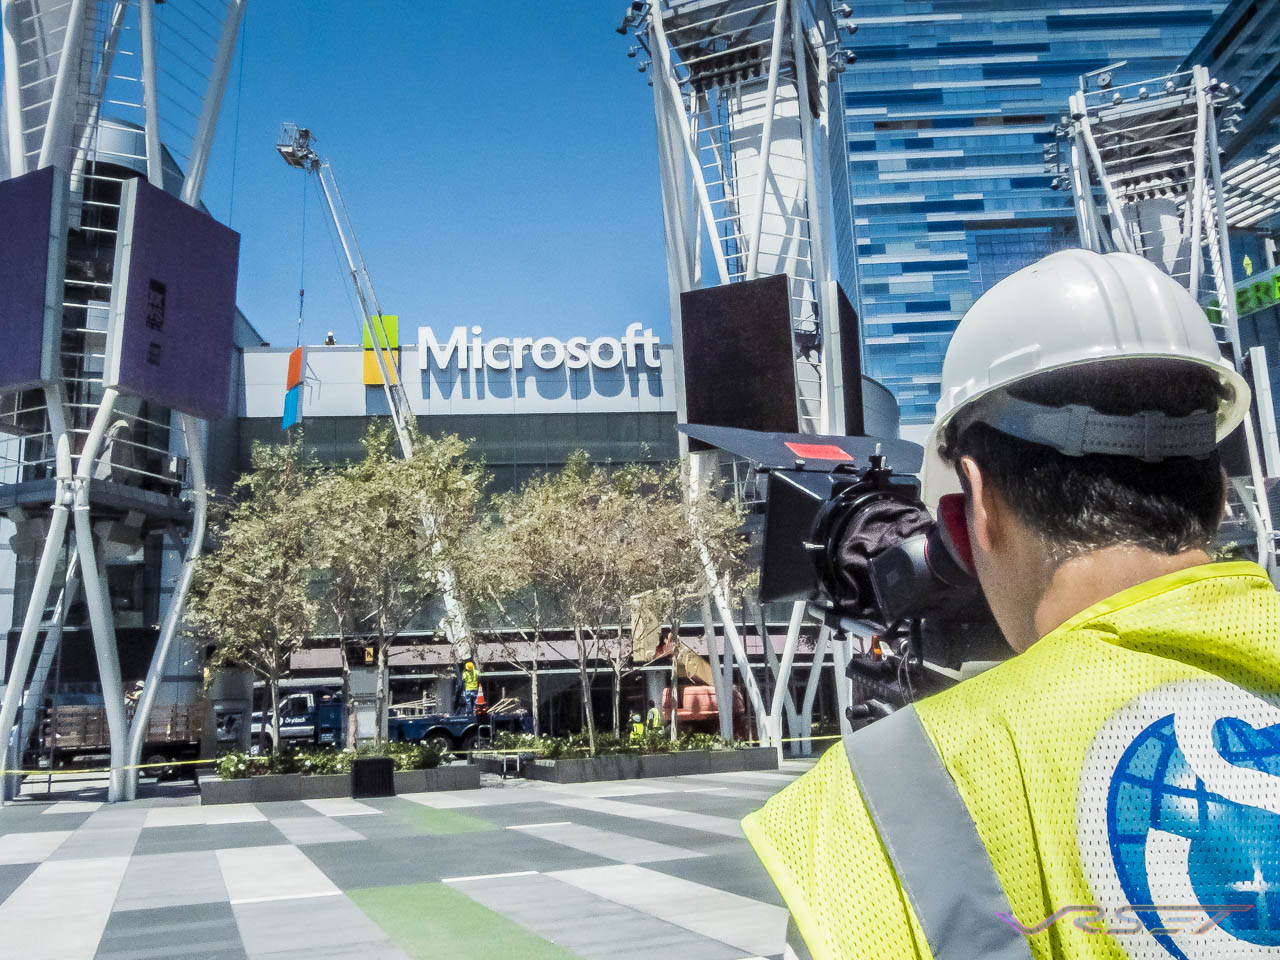 Producing Video For Microsoft Transformation Of DTLA NOKIA Center As MS Logo Installed Behind Scene Orange County Los Angeles Fashion Photographer